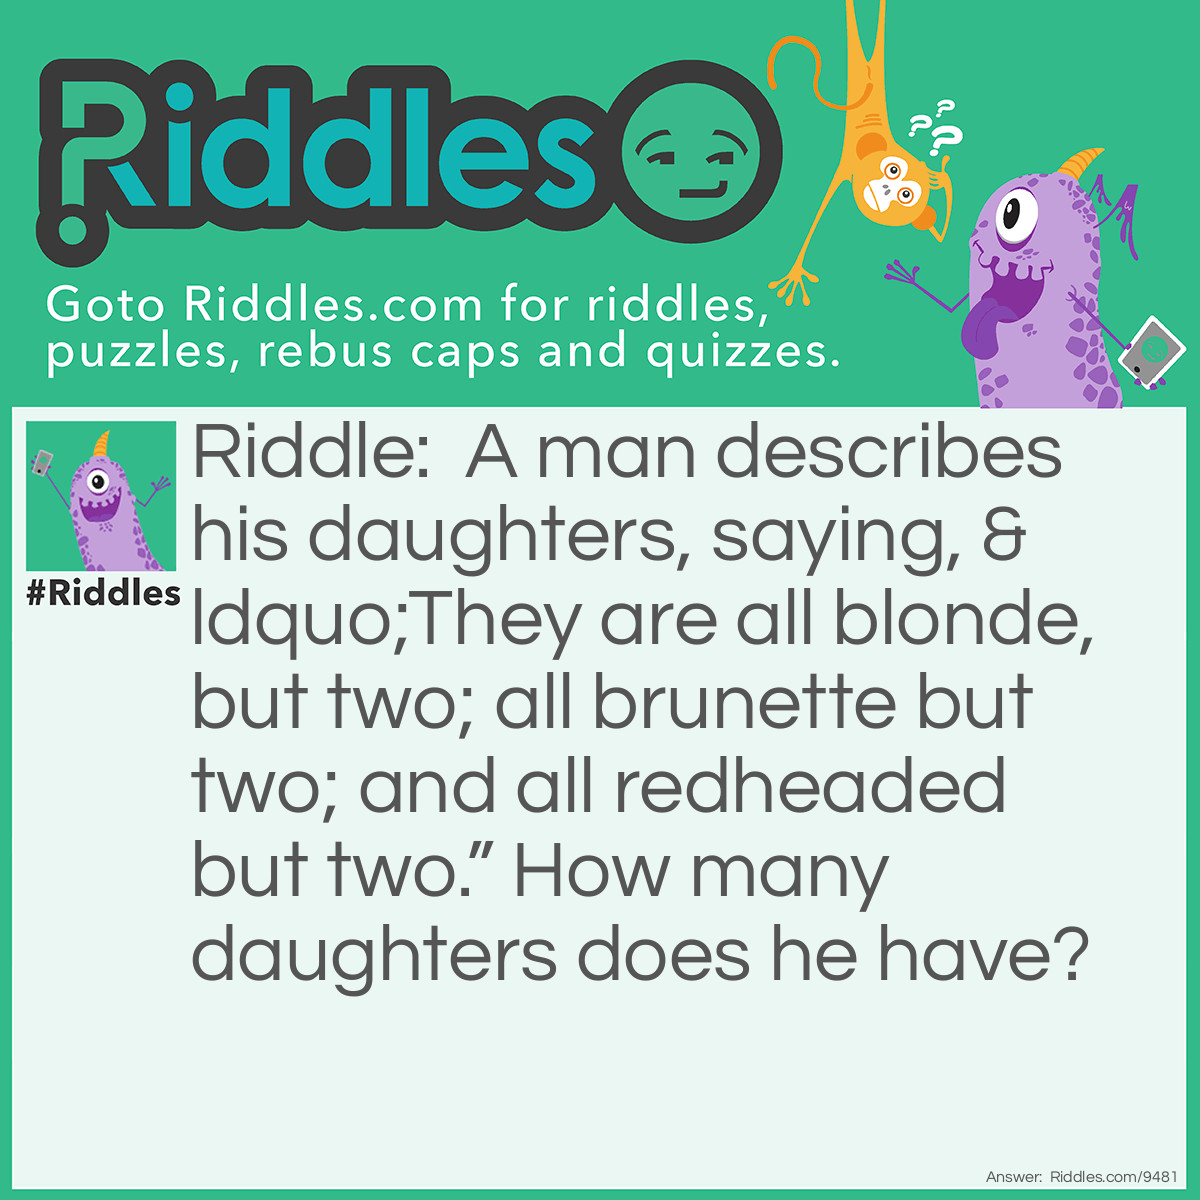 Riddle: A man describes his daughters, saying, "They are all blonde, but two; all brunette but two; and all redheaded but two." How many daughters does he have? Answer: Answer: Three: A blonde, a brunette and a redhead